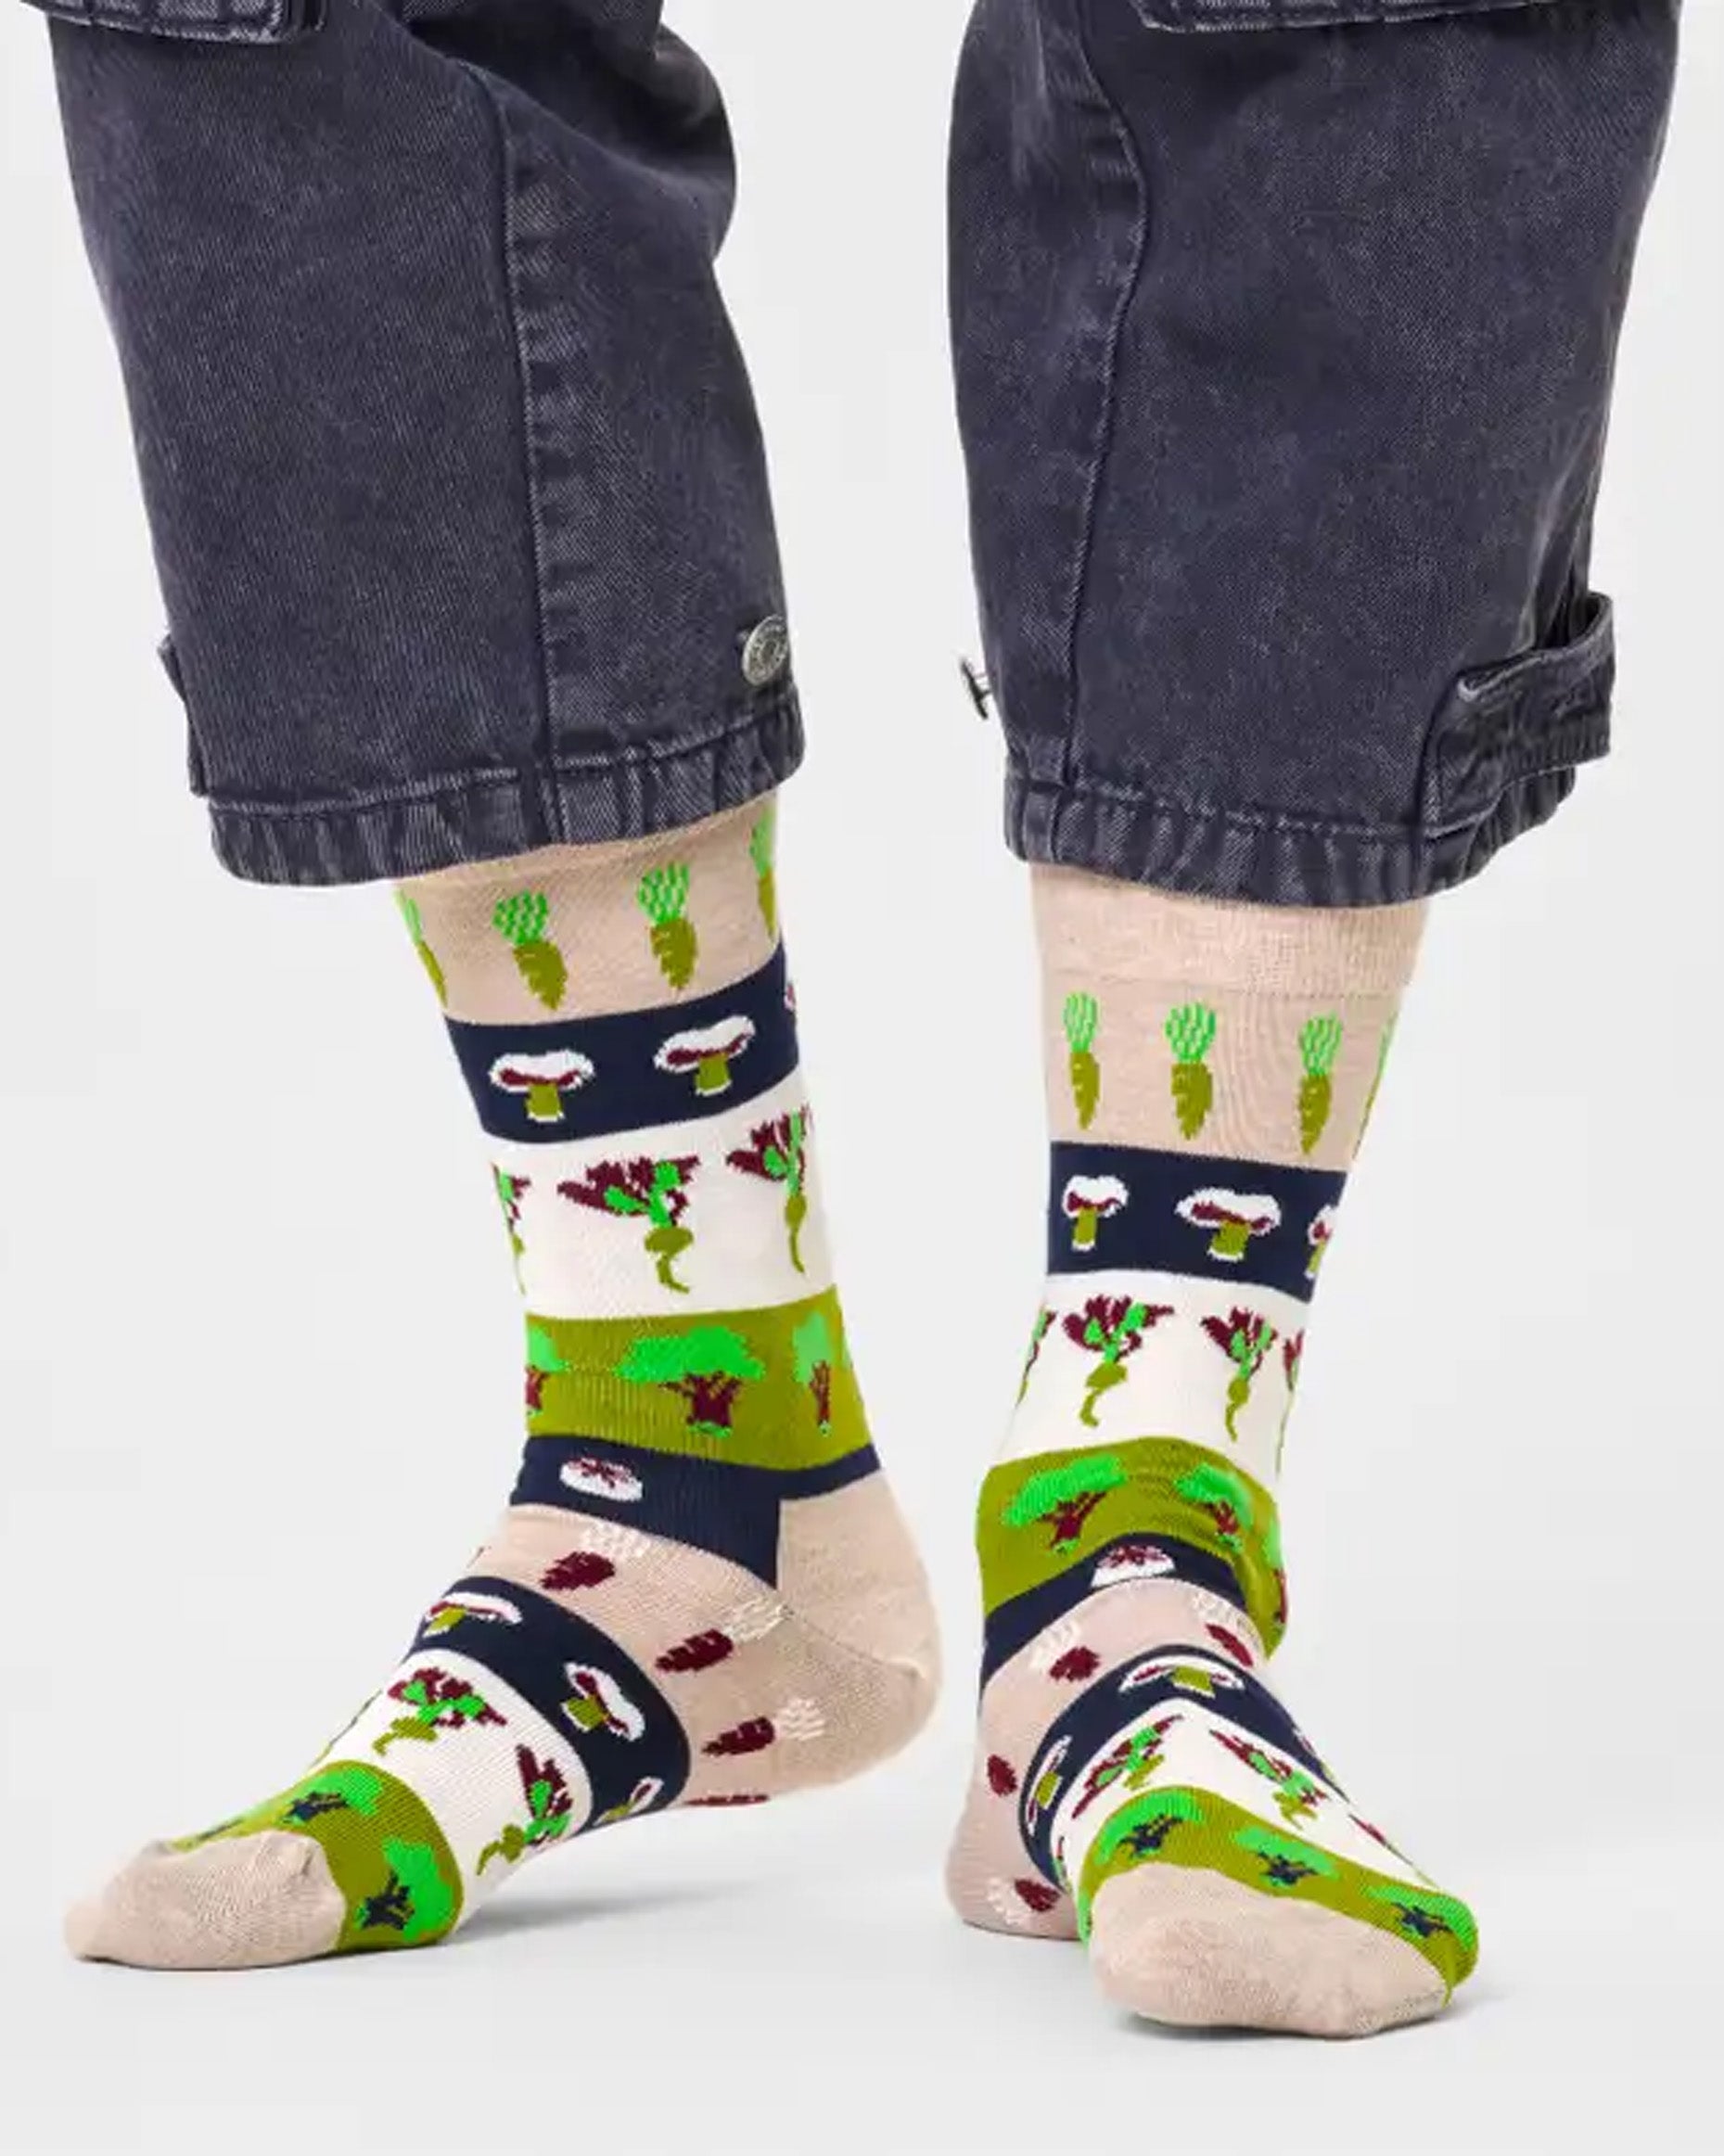 Happy Socks Veggie Sock - Beige oat coloured crew cotton socks with a stripe pattern of assorted vegetables including carrots, broccoli, mushrooms, turnips etc. in shades of green and wine.  Perfect gift for vegans and vegetarians.